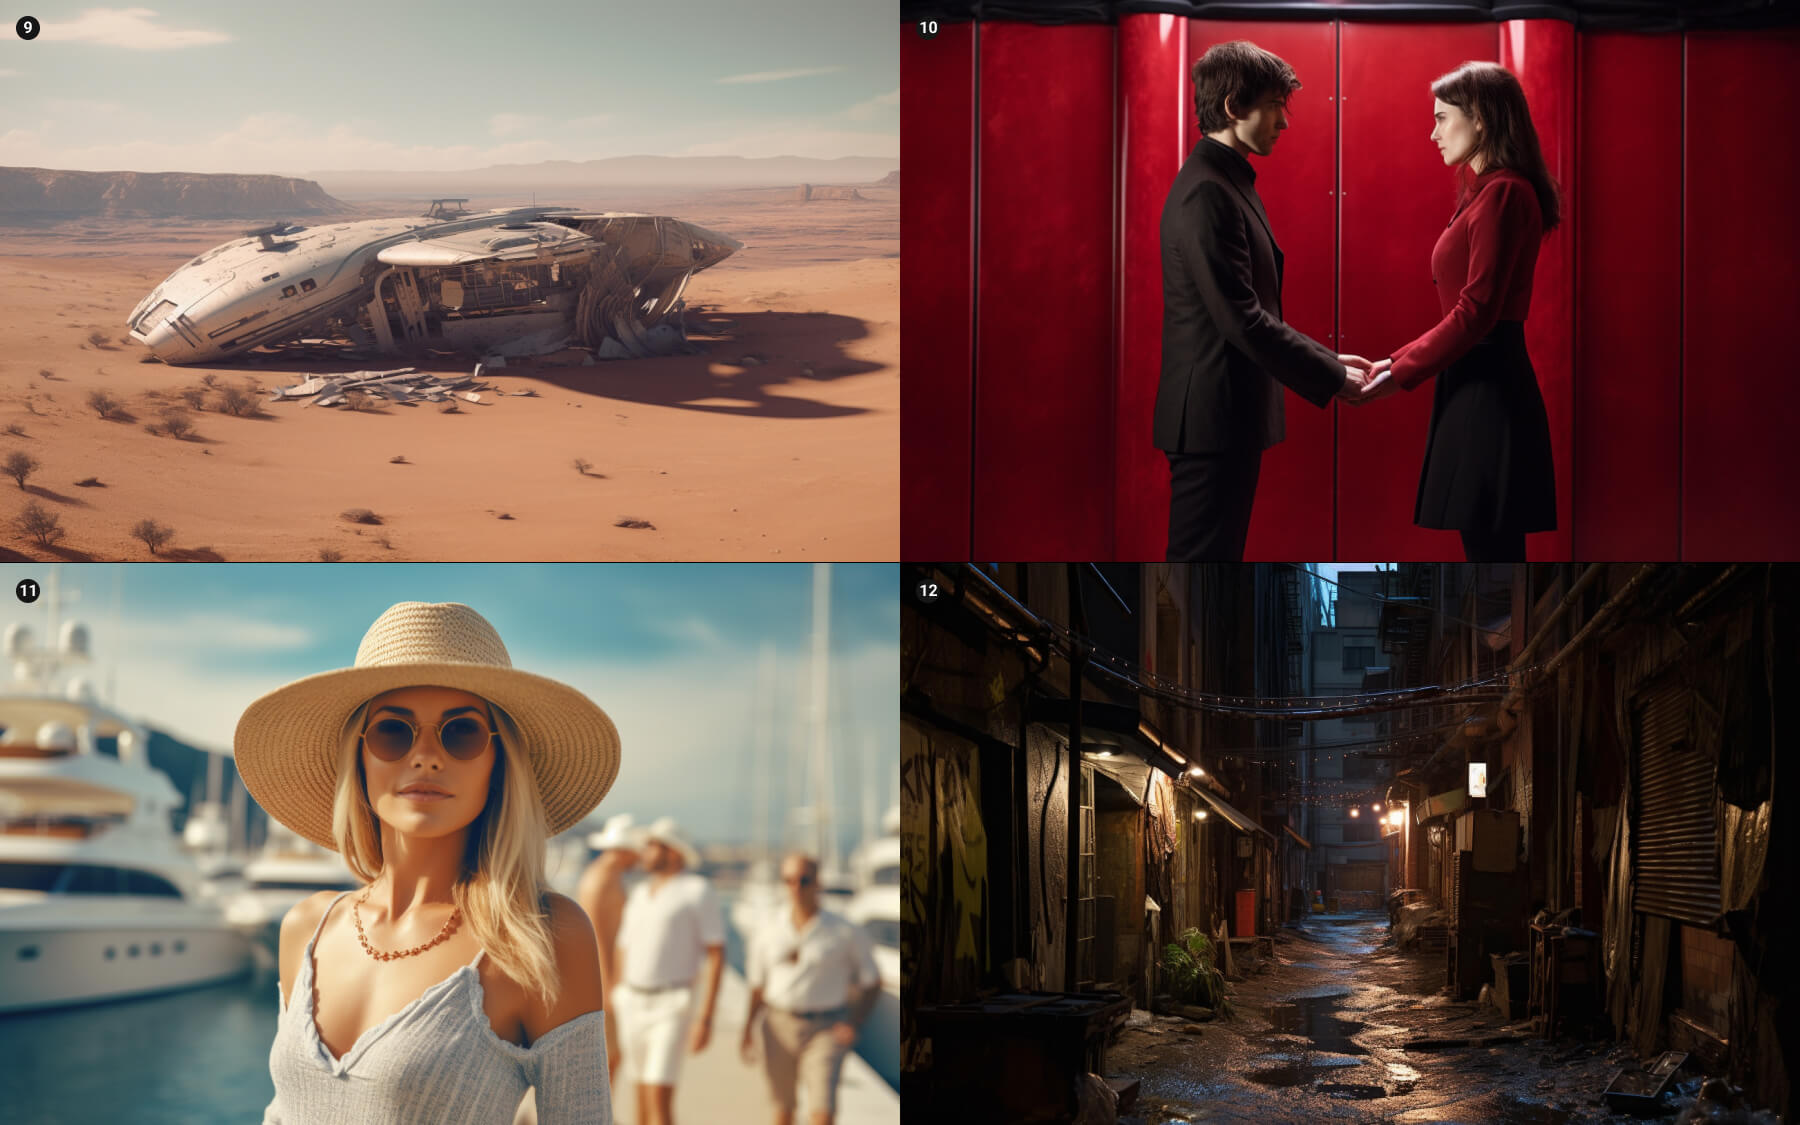 Four images generated with Midjourney, a crashed space ship, two people standing in front of each other, a woman with a straw hat and a dim lit alley